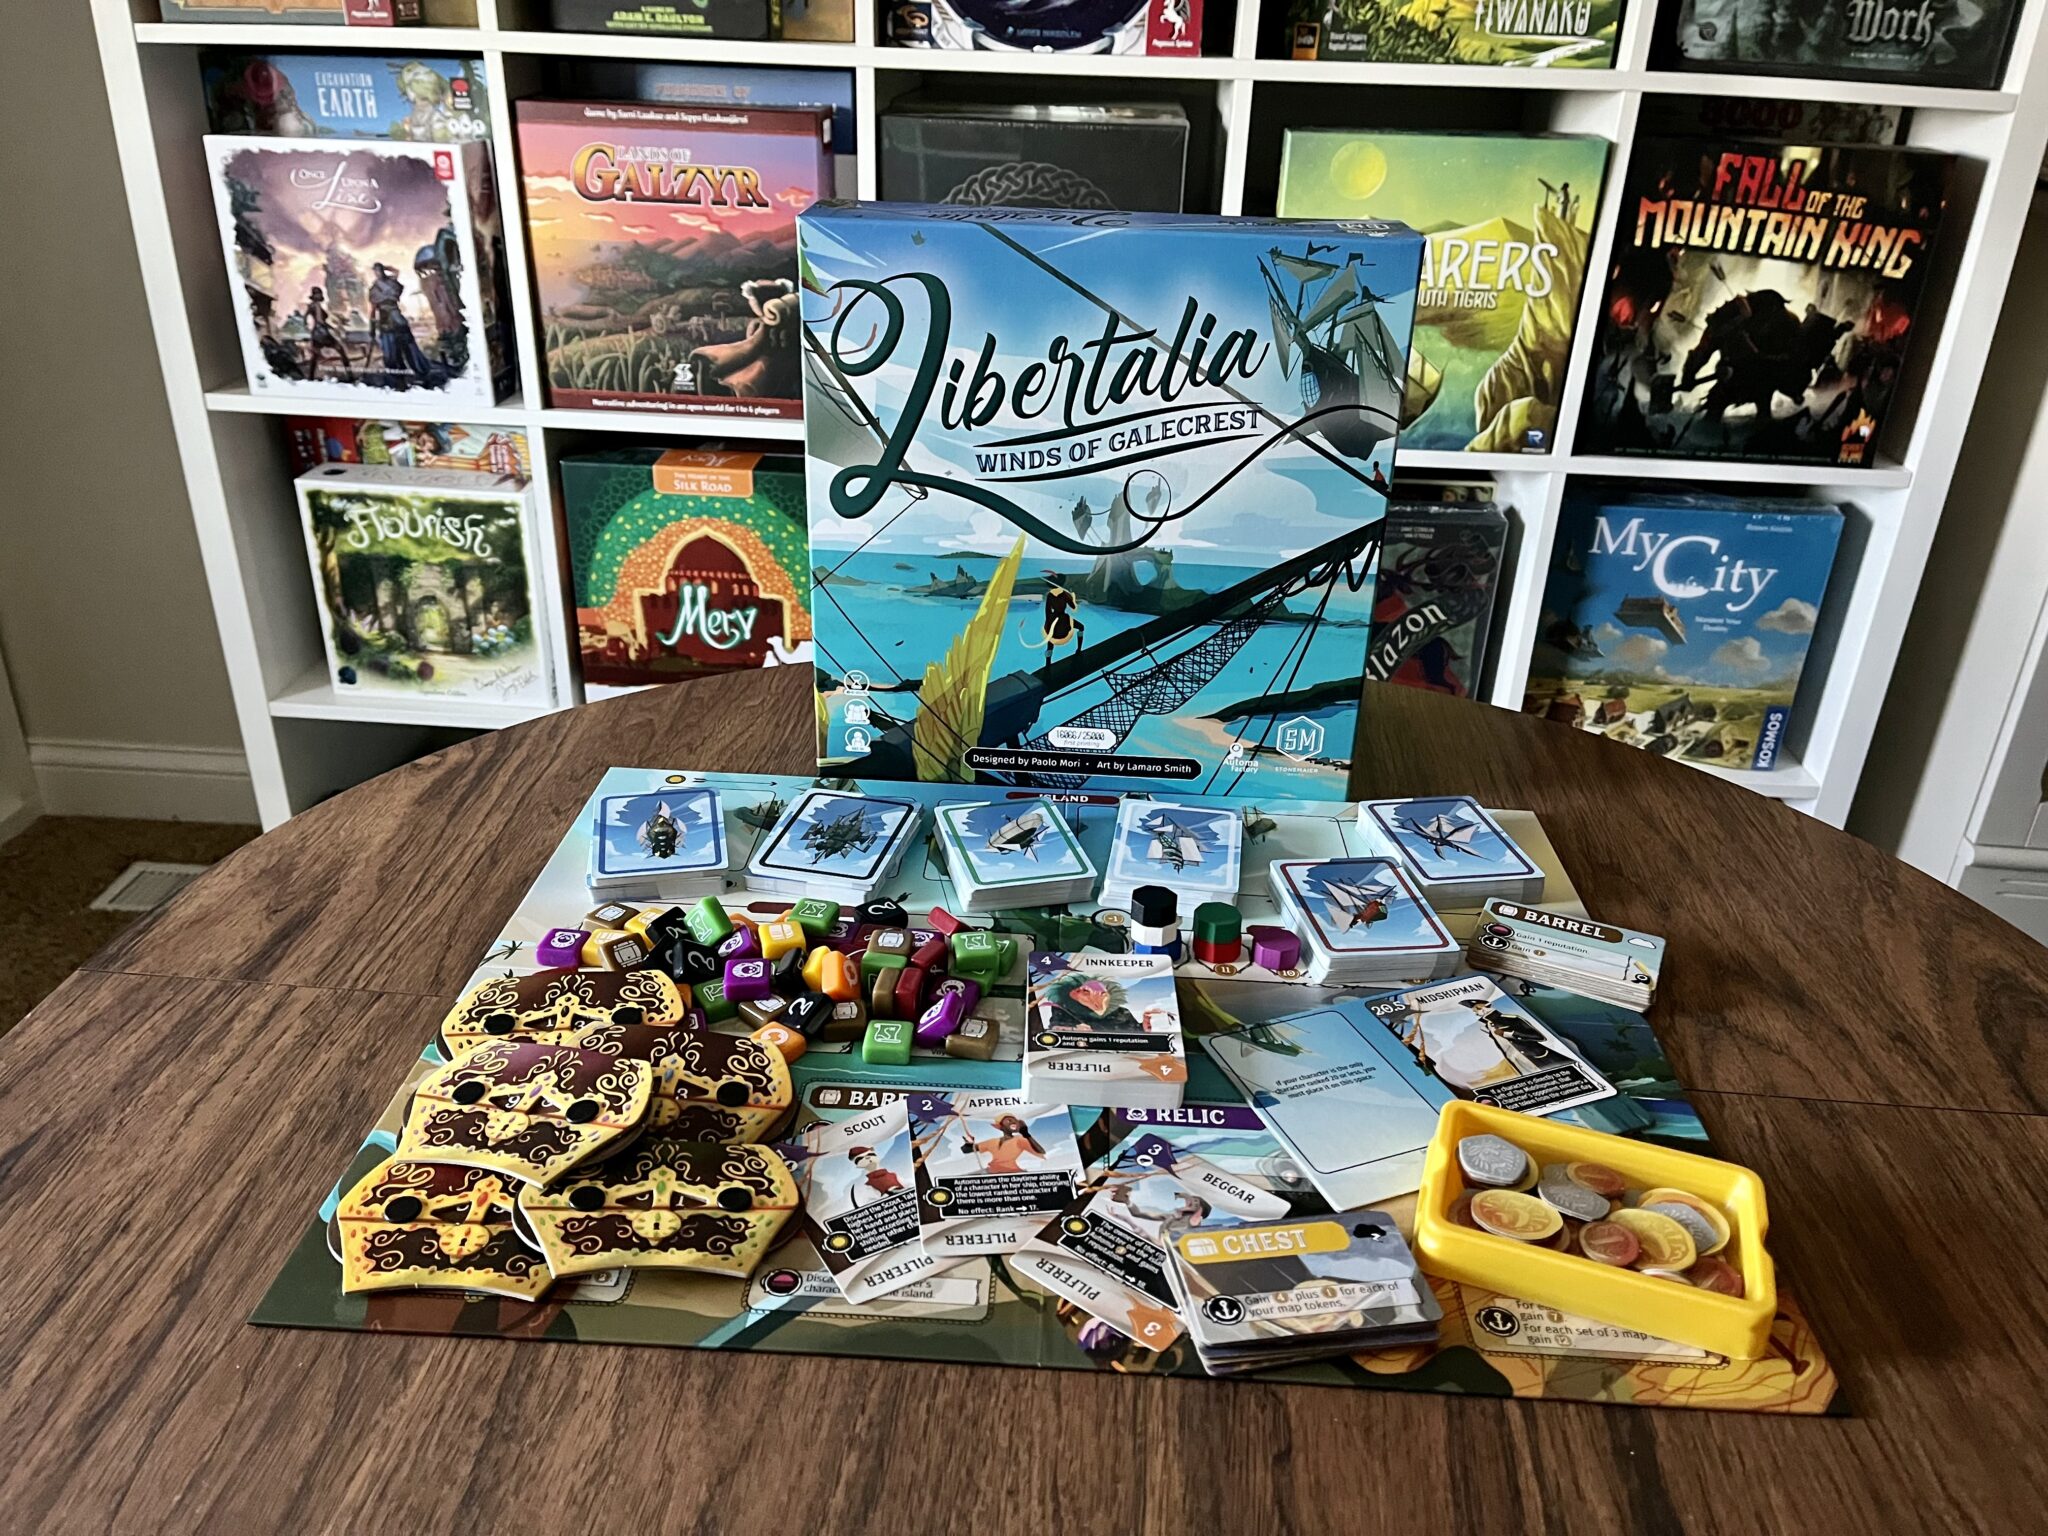 Libertalia: Winds of Galecrest with all components on the table